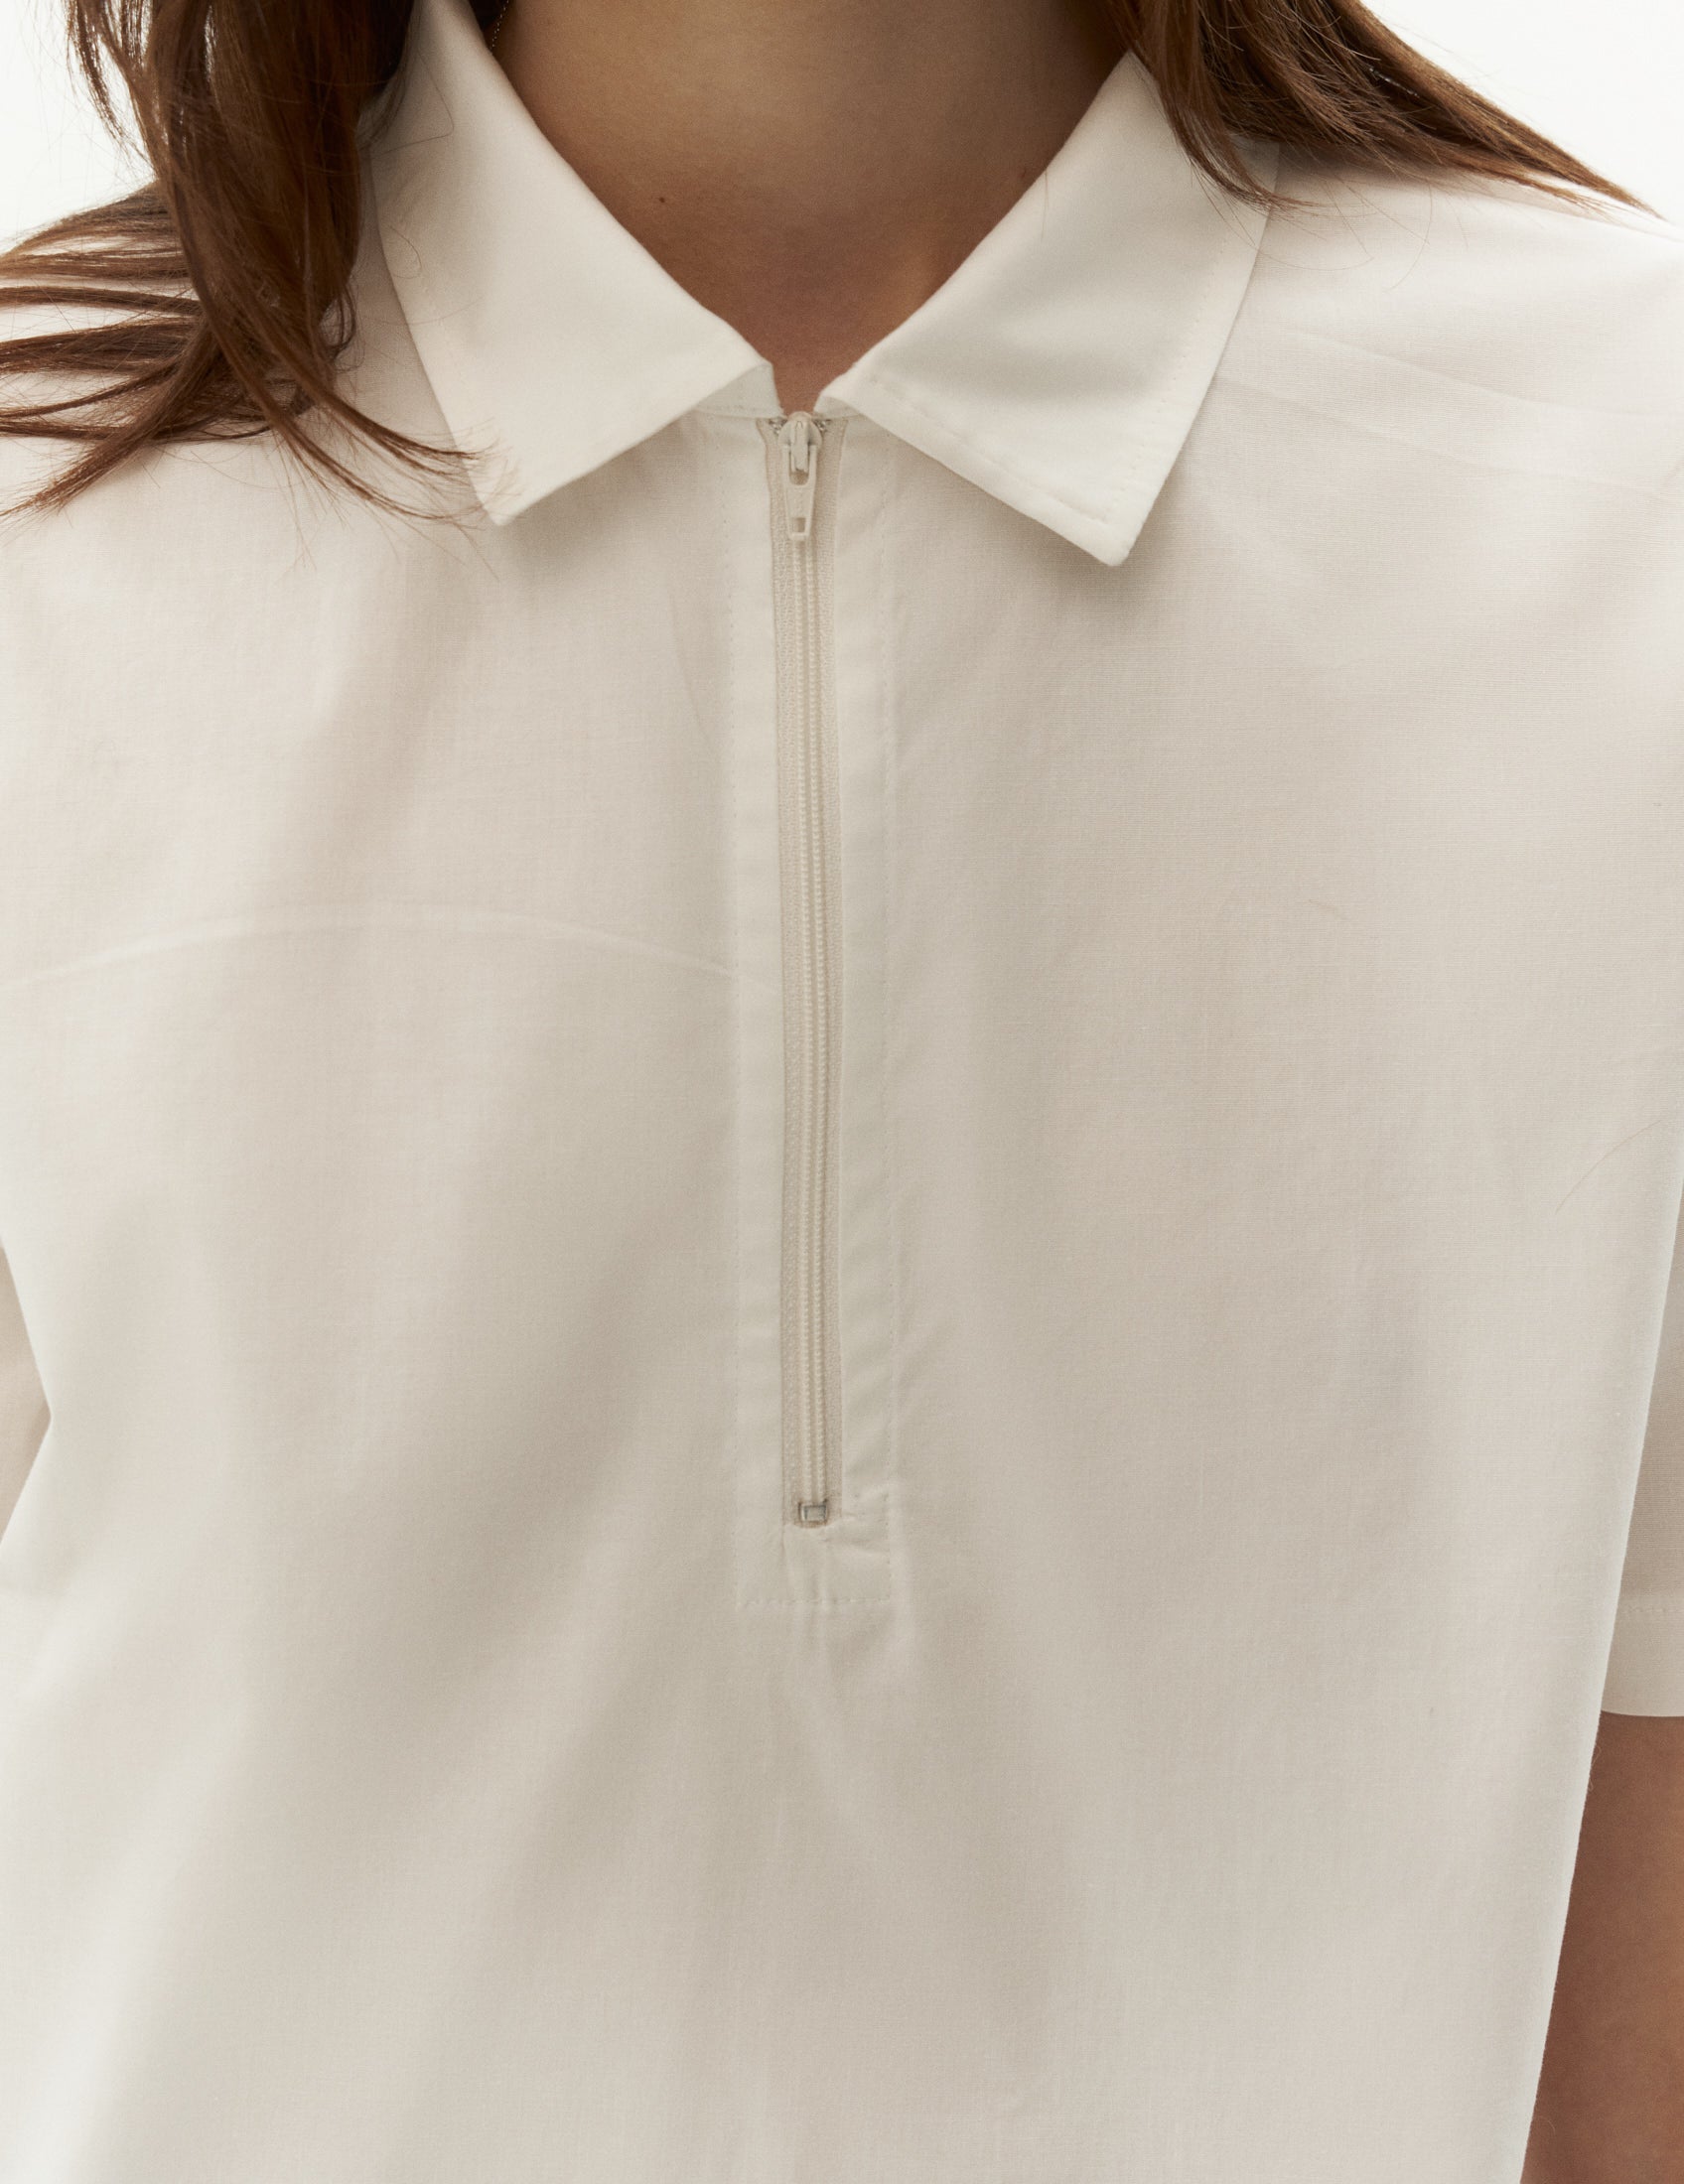 Introducing our timeless white polo shirt, a versatile and stylish addition to your wardrobe. FORMA shop online